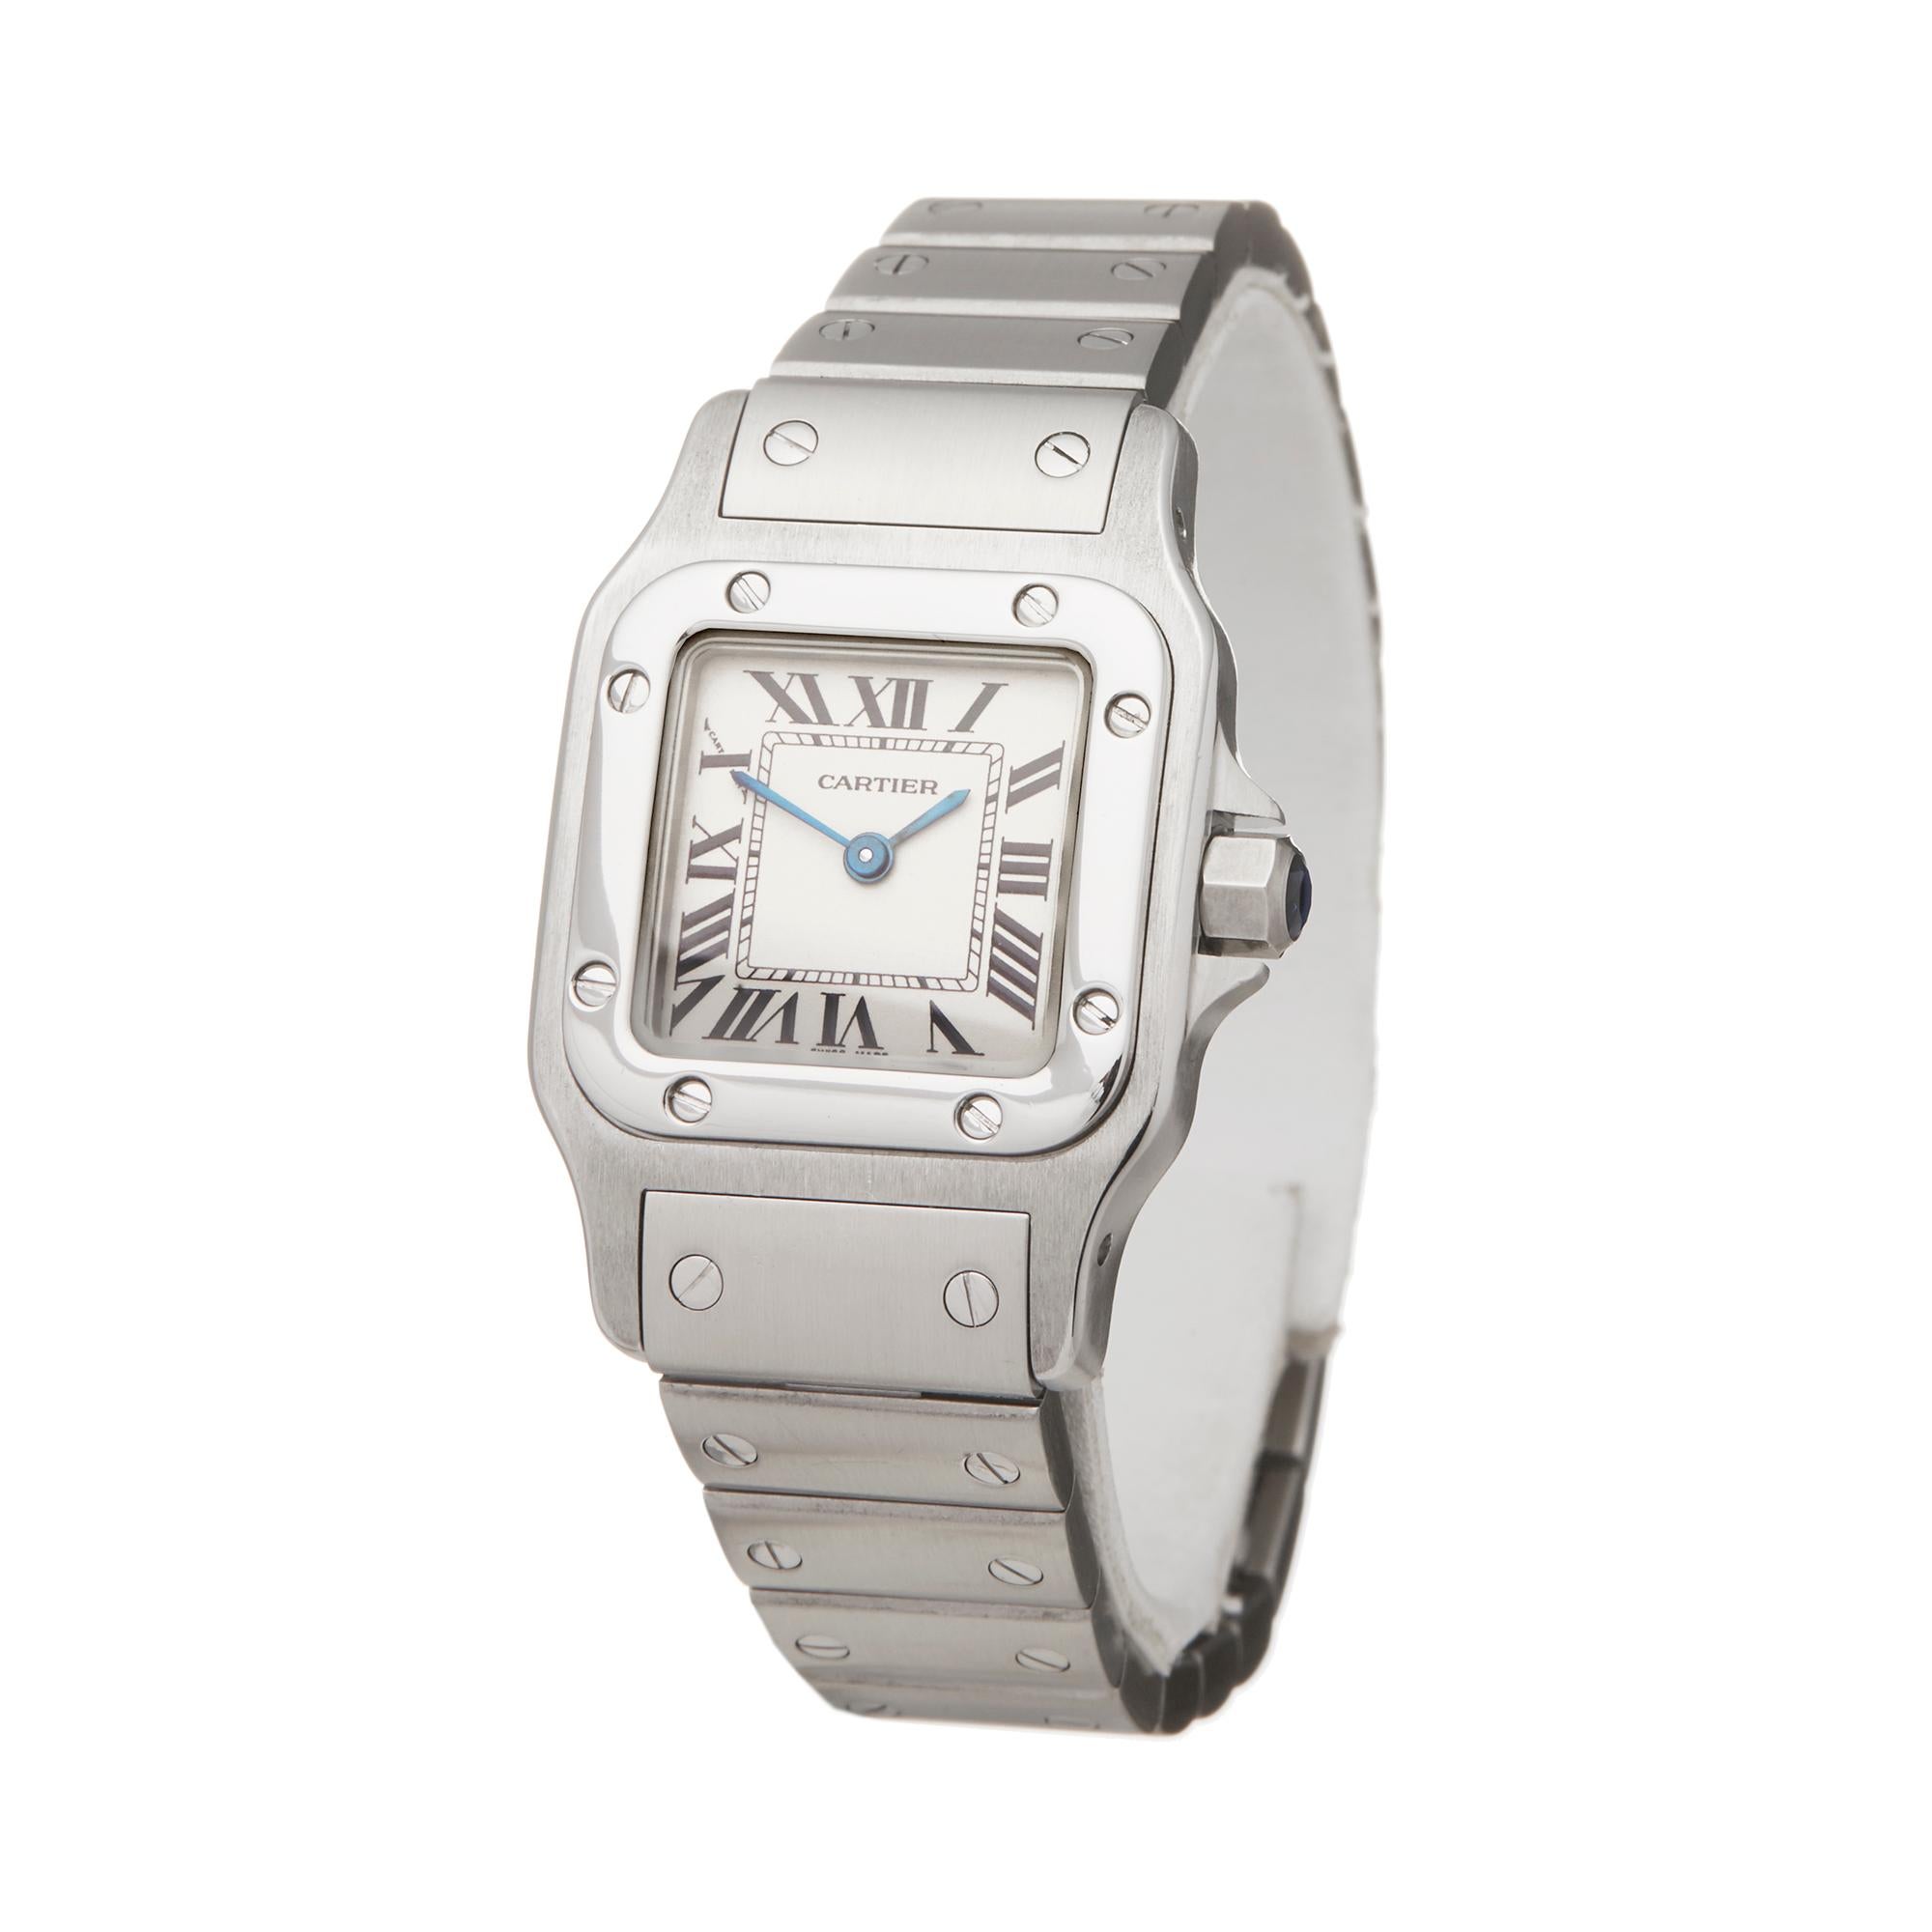 Ref: W5856
Manufacturer: Cartier
Model: Santos Galbee
Model Ref: 1565
Age: Circa 2000's
Gender: Ladies
Complete With: Presentation Box
Dial: White Roman 
Glass: Sapphire Crystal
Movement: Quartz
Water Resistance: To Manufacturers